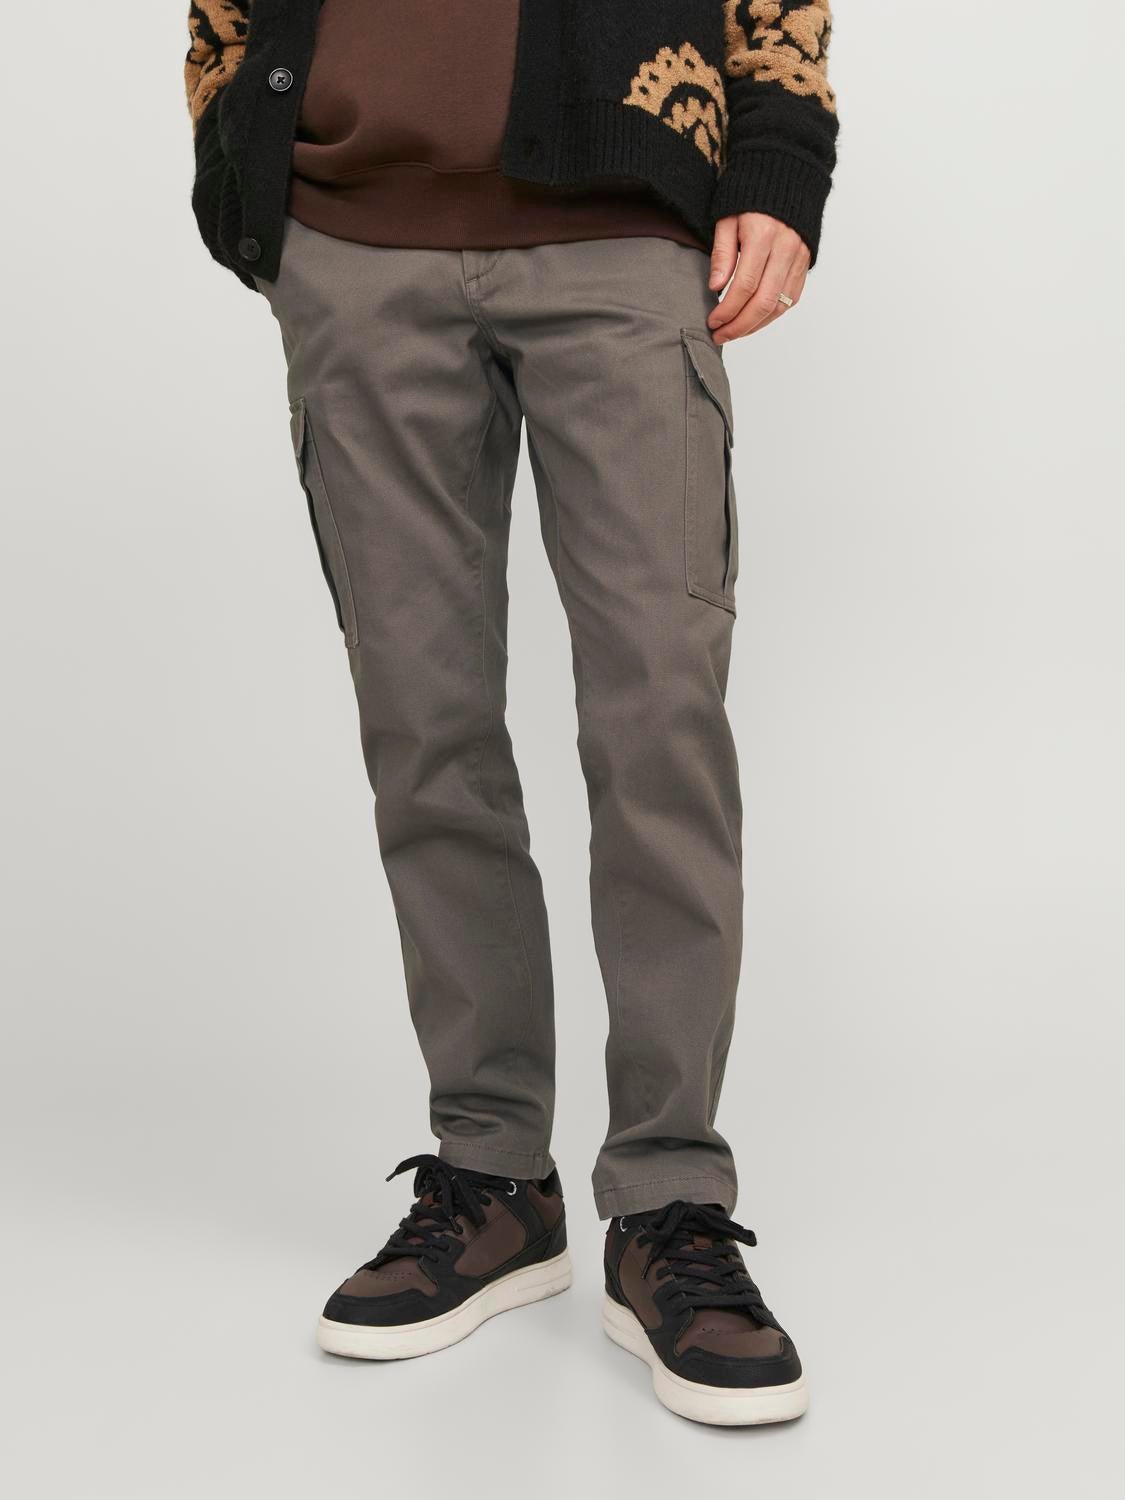 G Star Raw Tapered Cargo Trousers Beige | Mainline Menswear United States